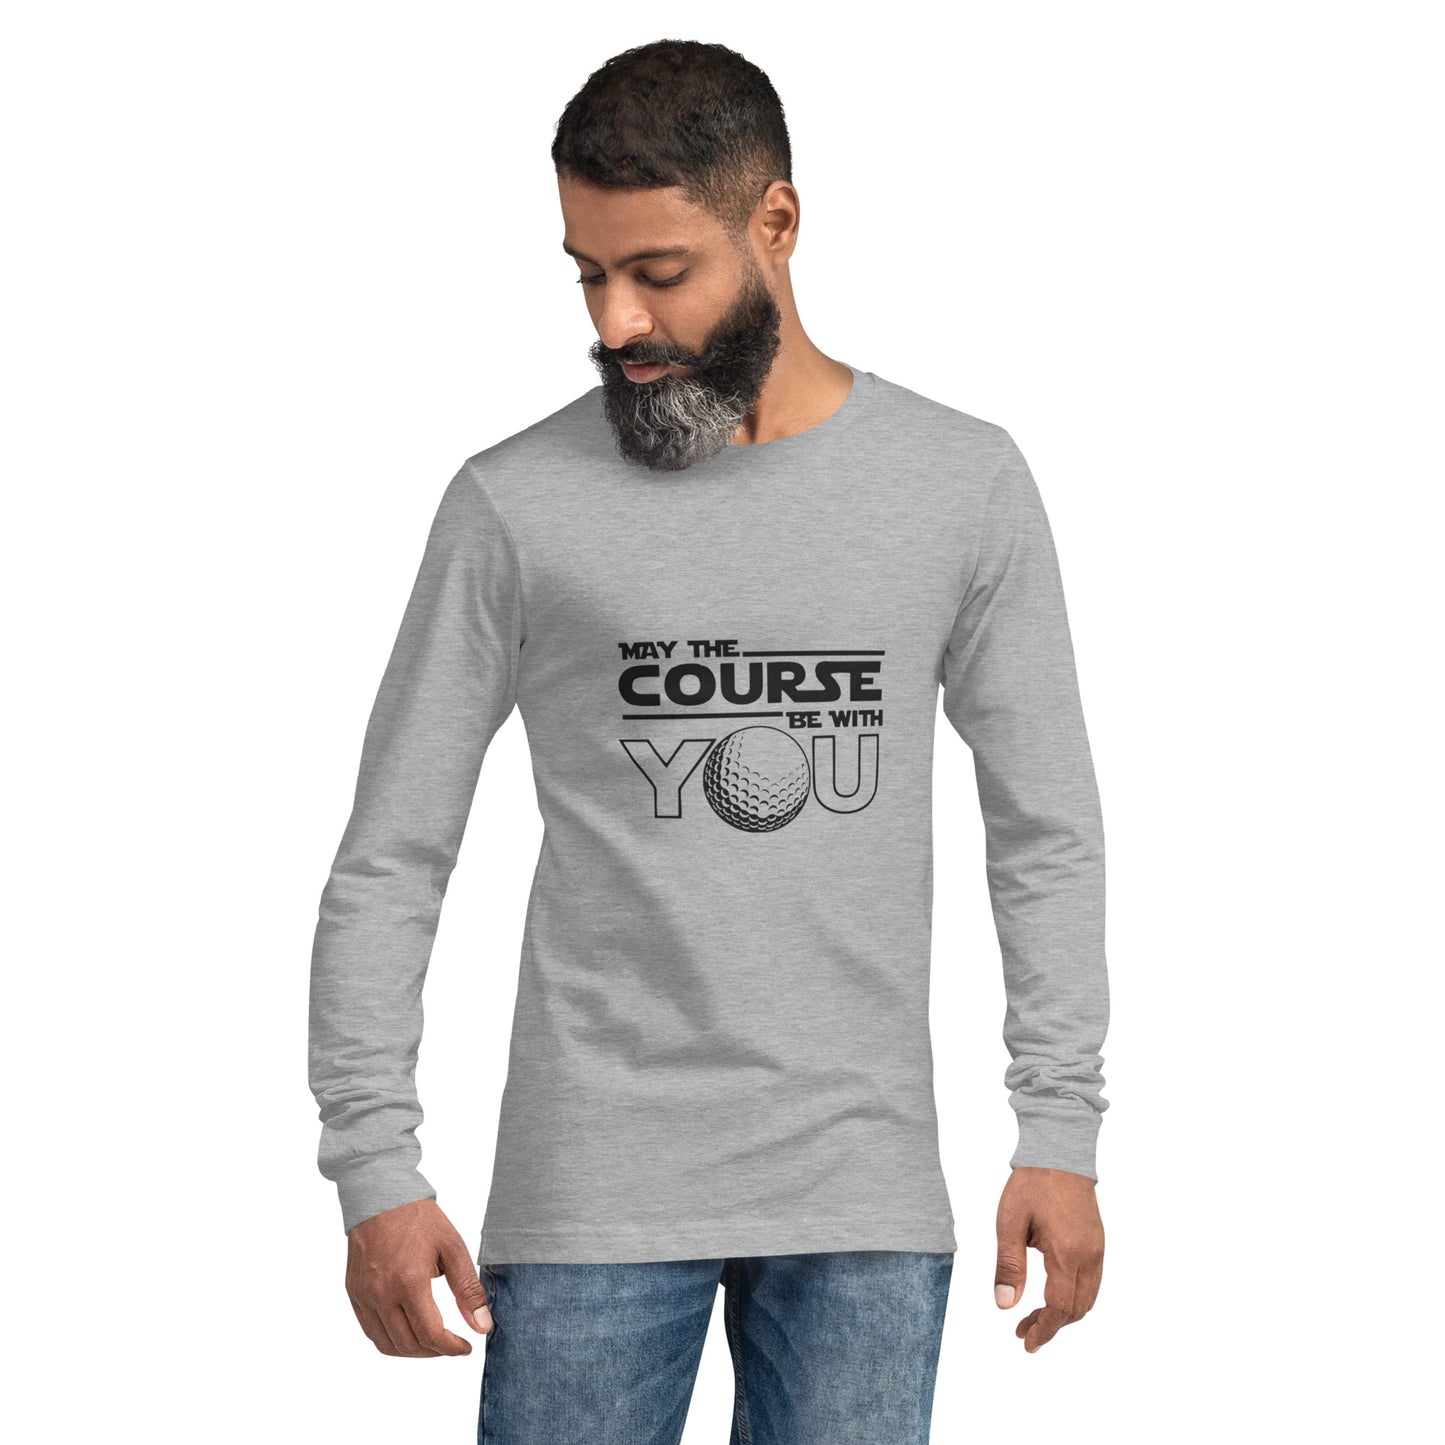 May The Course Be With You Long Sleeve Shirt